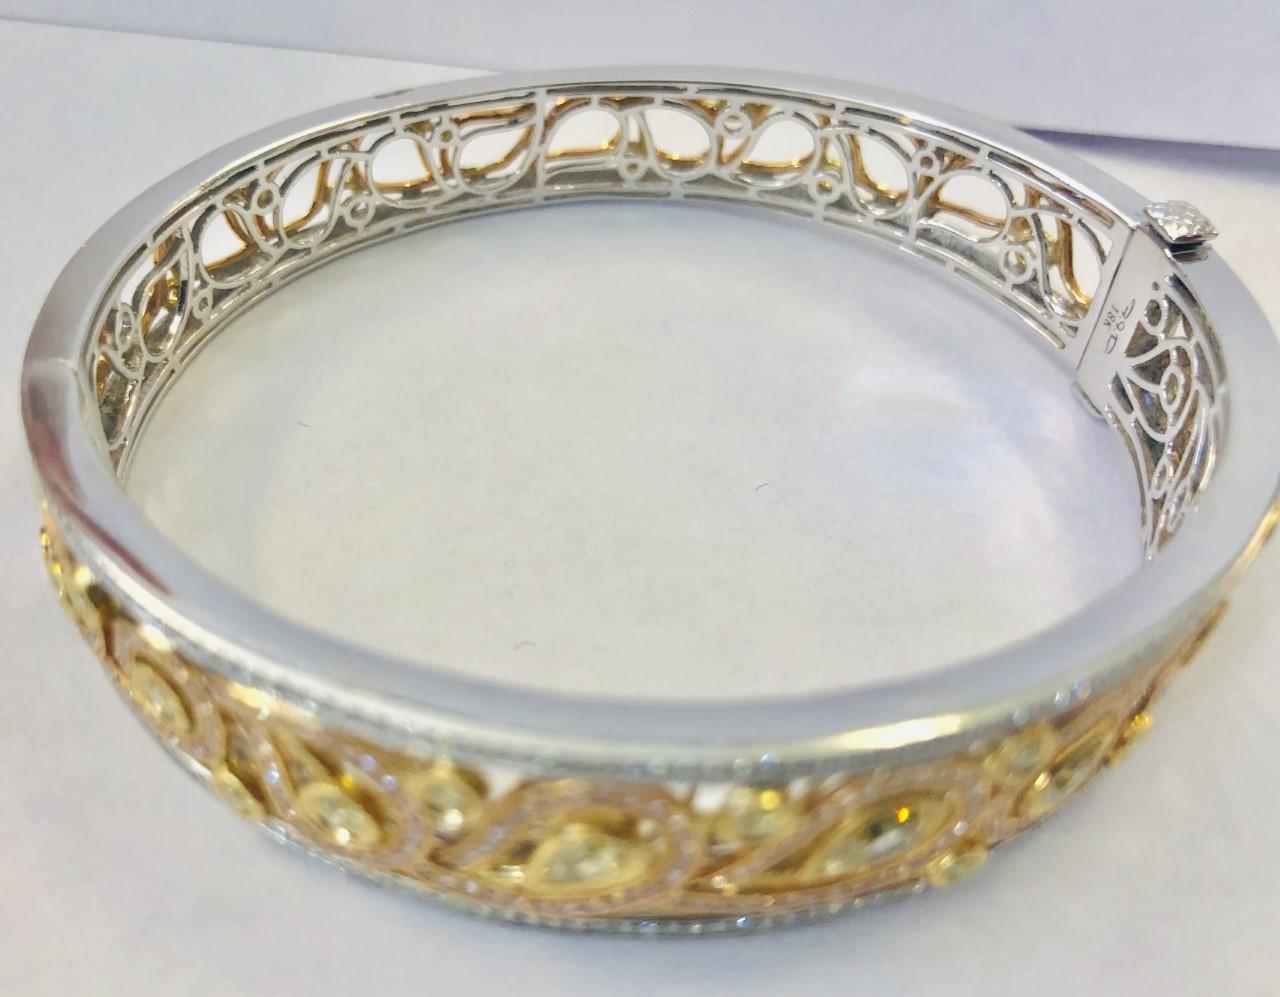 18KT Gold, Yellow Diamond Bangle-Bracelet 
Open work design and set at the front with three pear shaped yellow diamonds, weighing approximately 0.87 cts, and 178 round cut diamonds weighing approximately 0.66 cts

Measuring 2.4 x 2 in, weighing